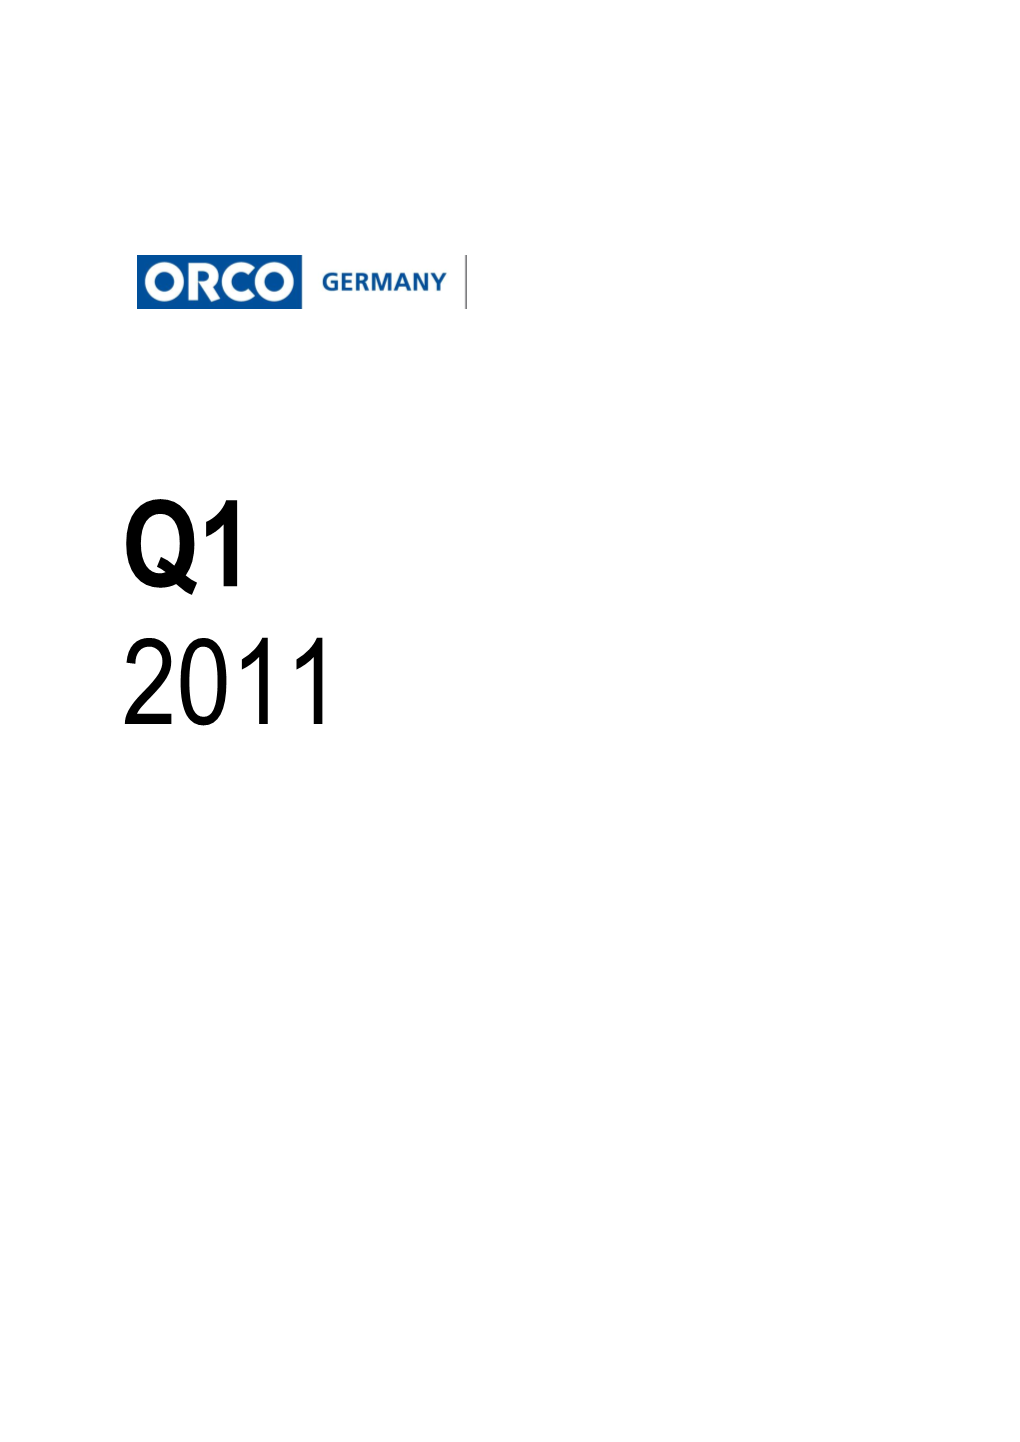 About Orco Germany S